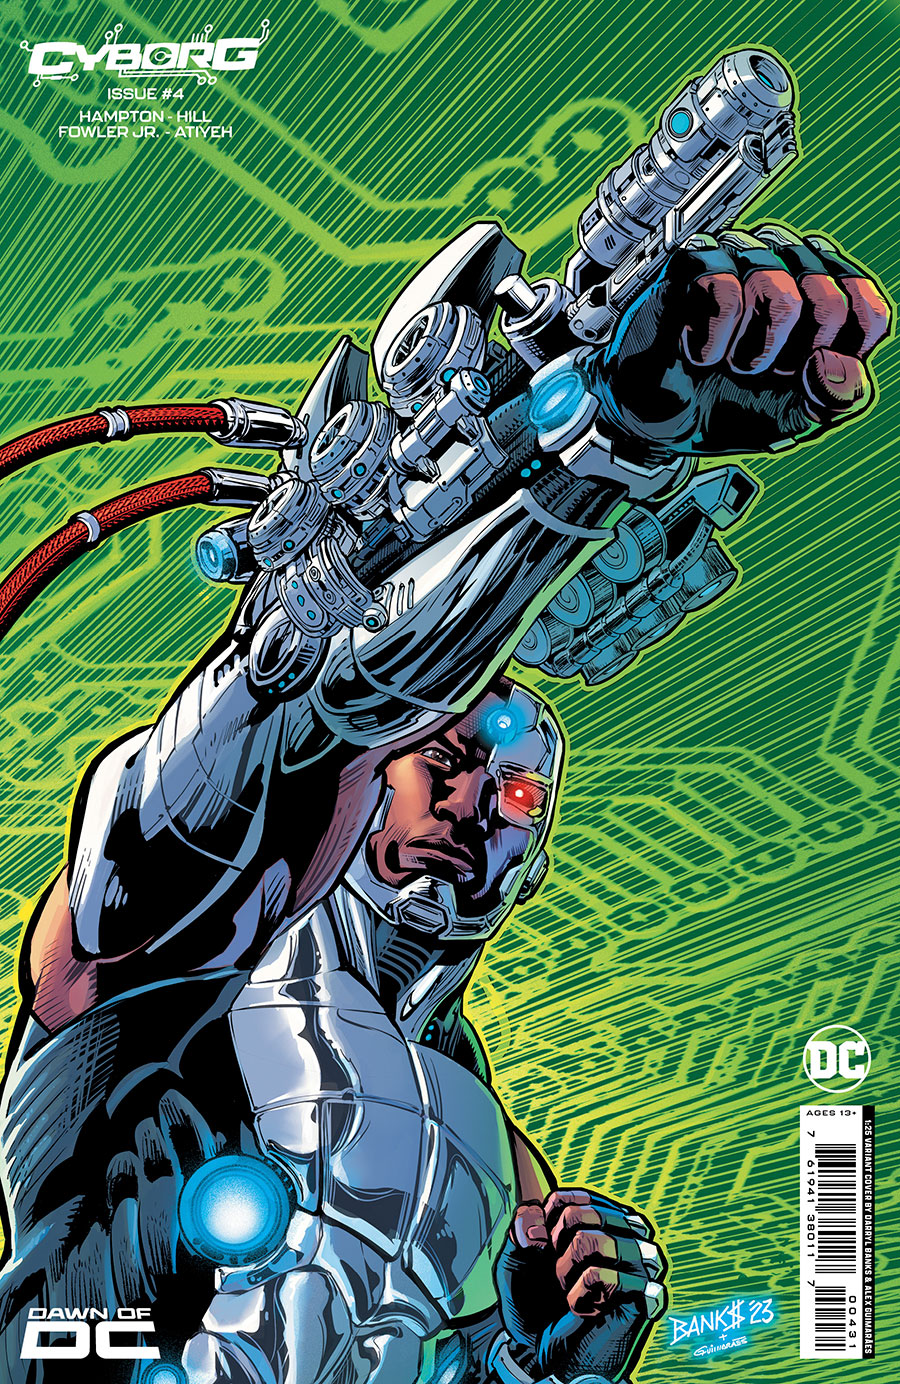 Cyborg Vol 3 #4 Cover C Incentive Darryl Banks Card Stock Variant Cover